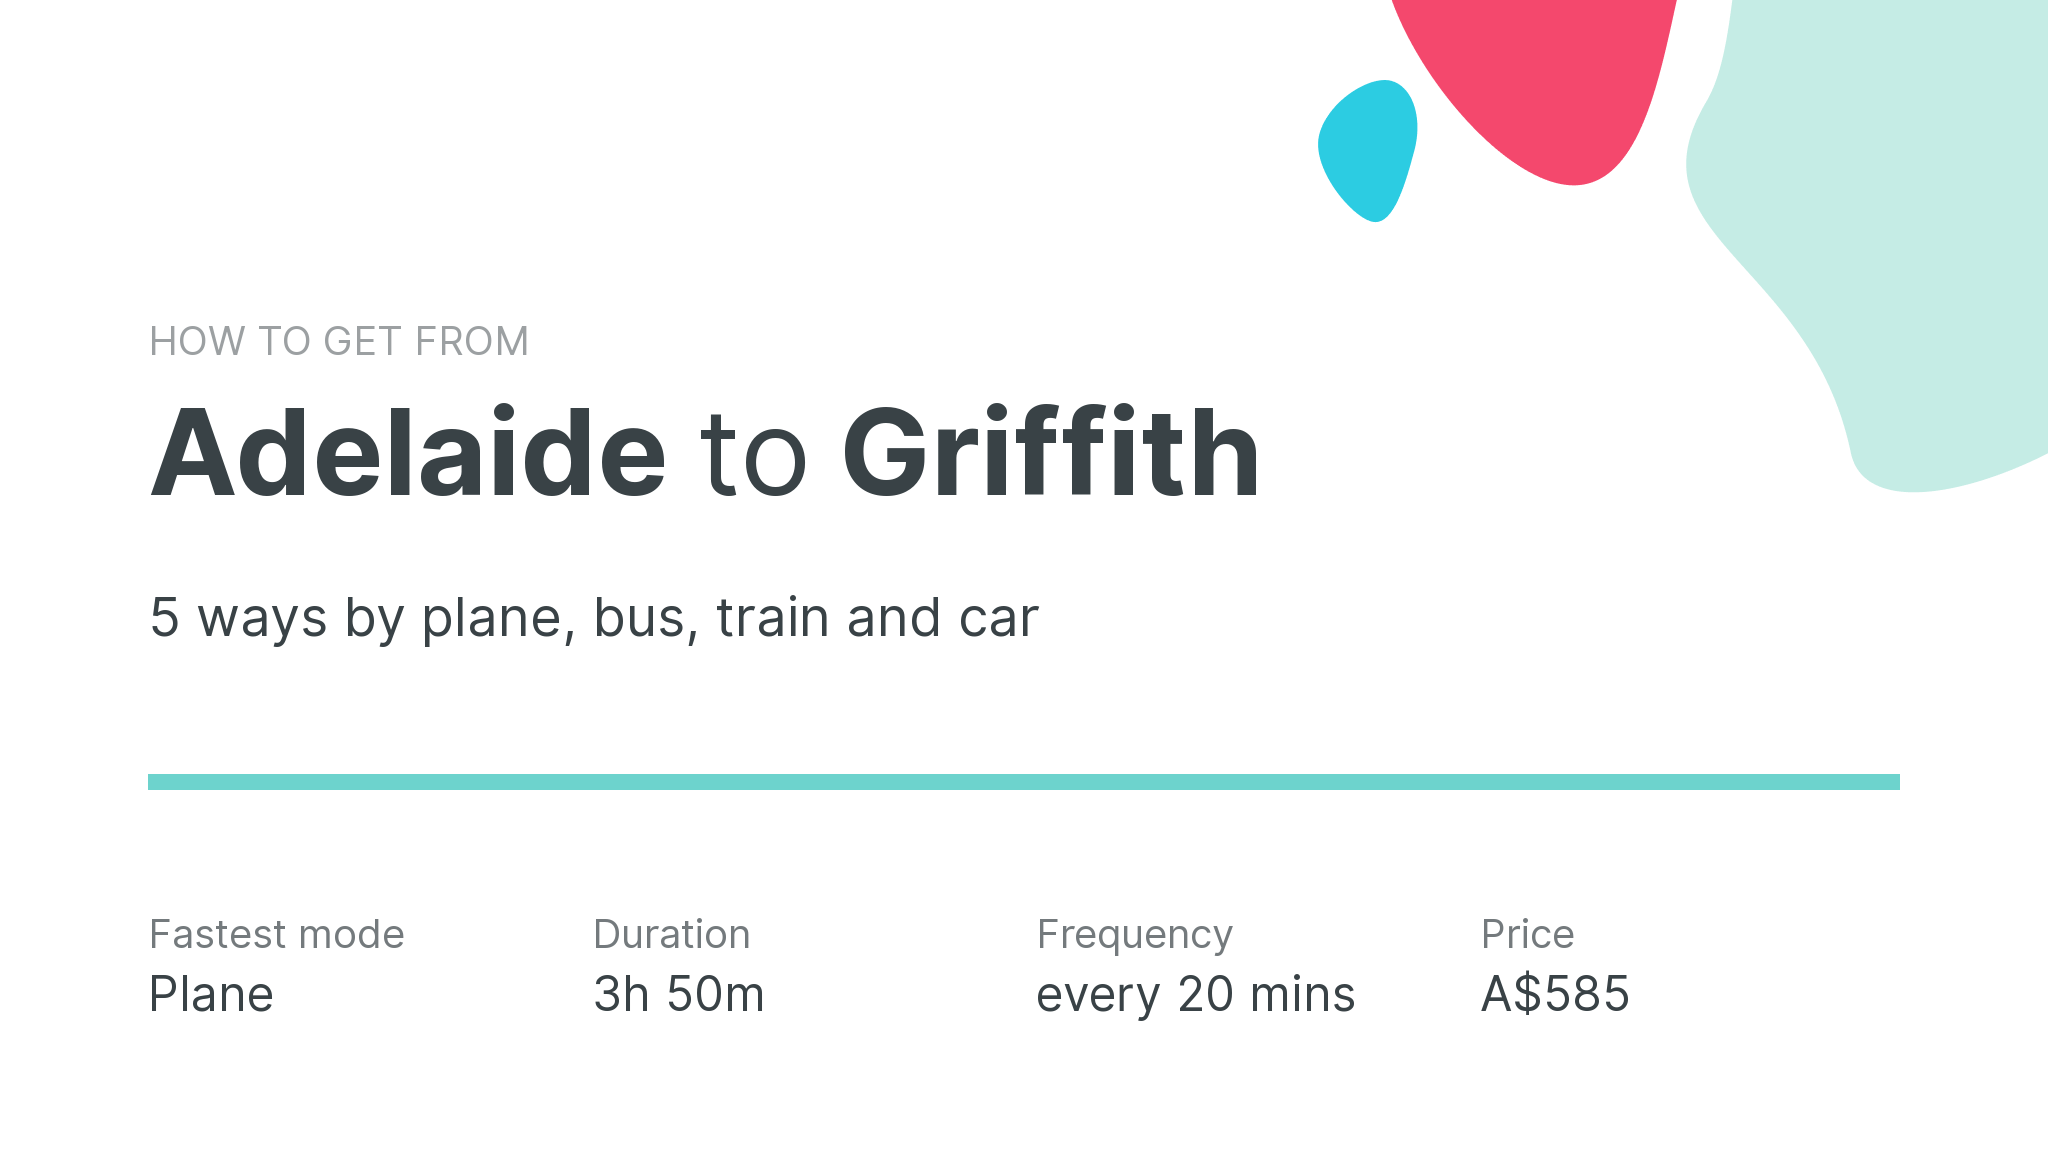 How do I get from Adelaide to Griffith